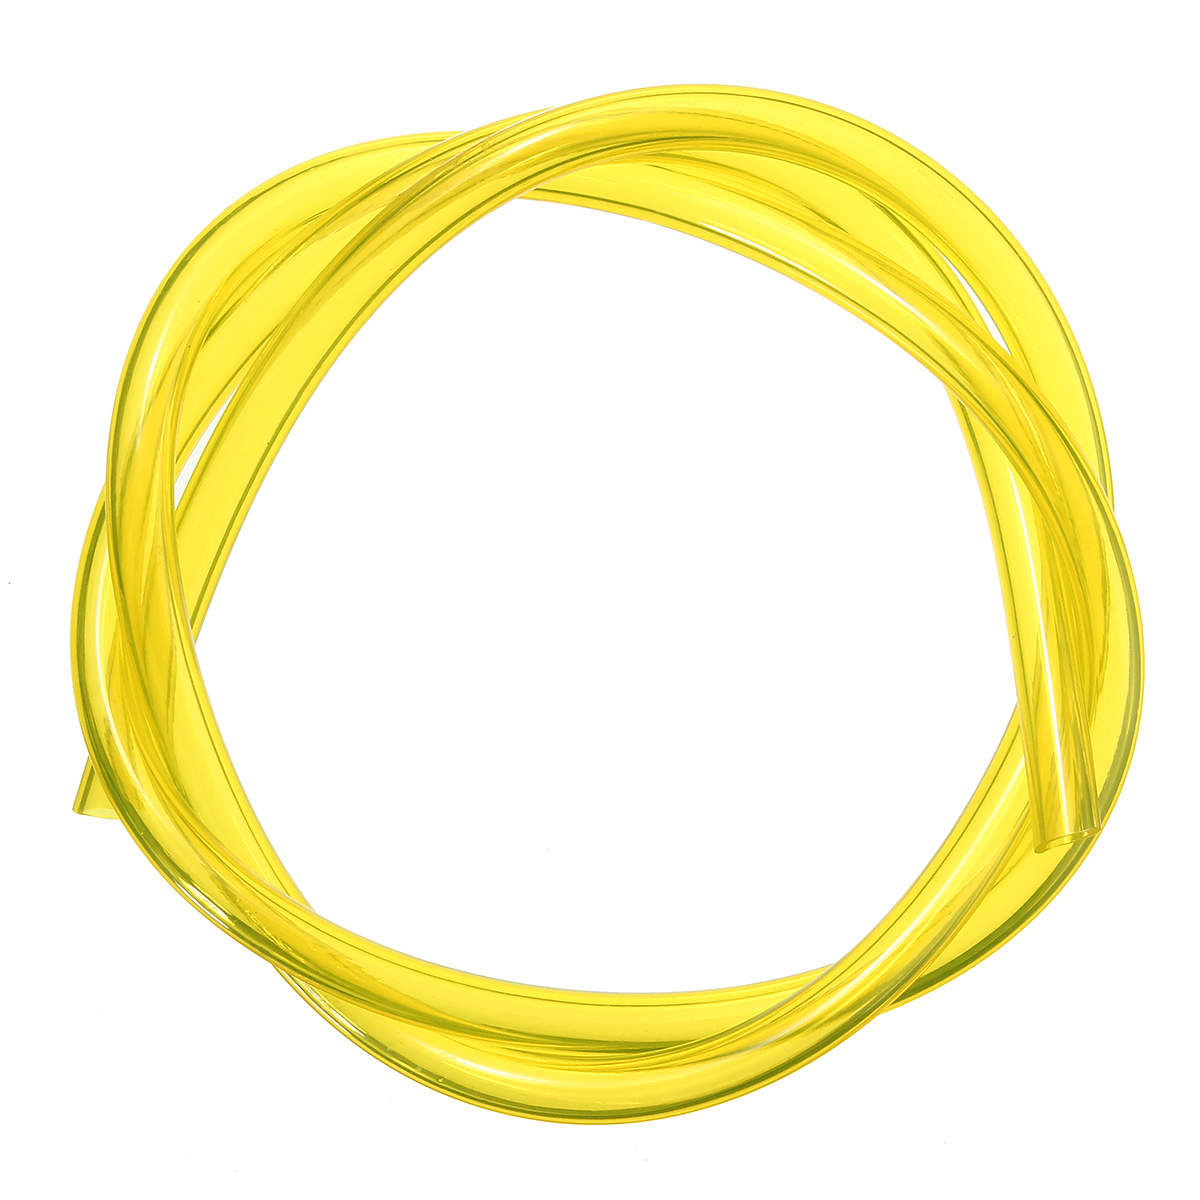 3x5mm-Fuel-Hose-Fuel-Filter-Hose-For-Mower-Motorcycle-Scooter-Brushcutter-1340145-1